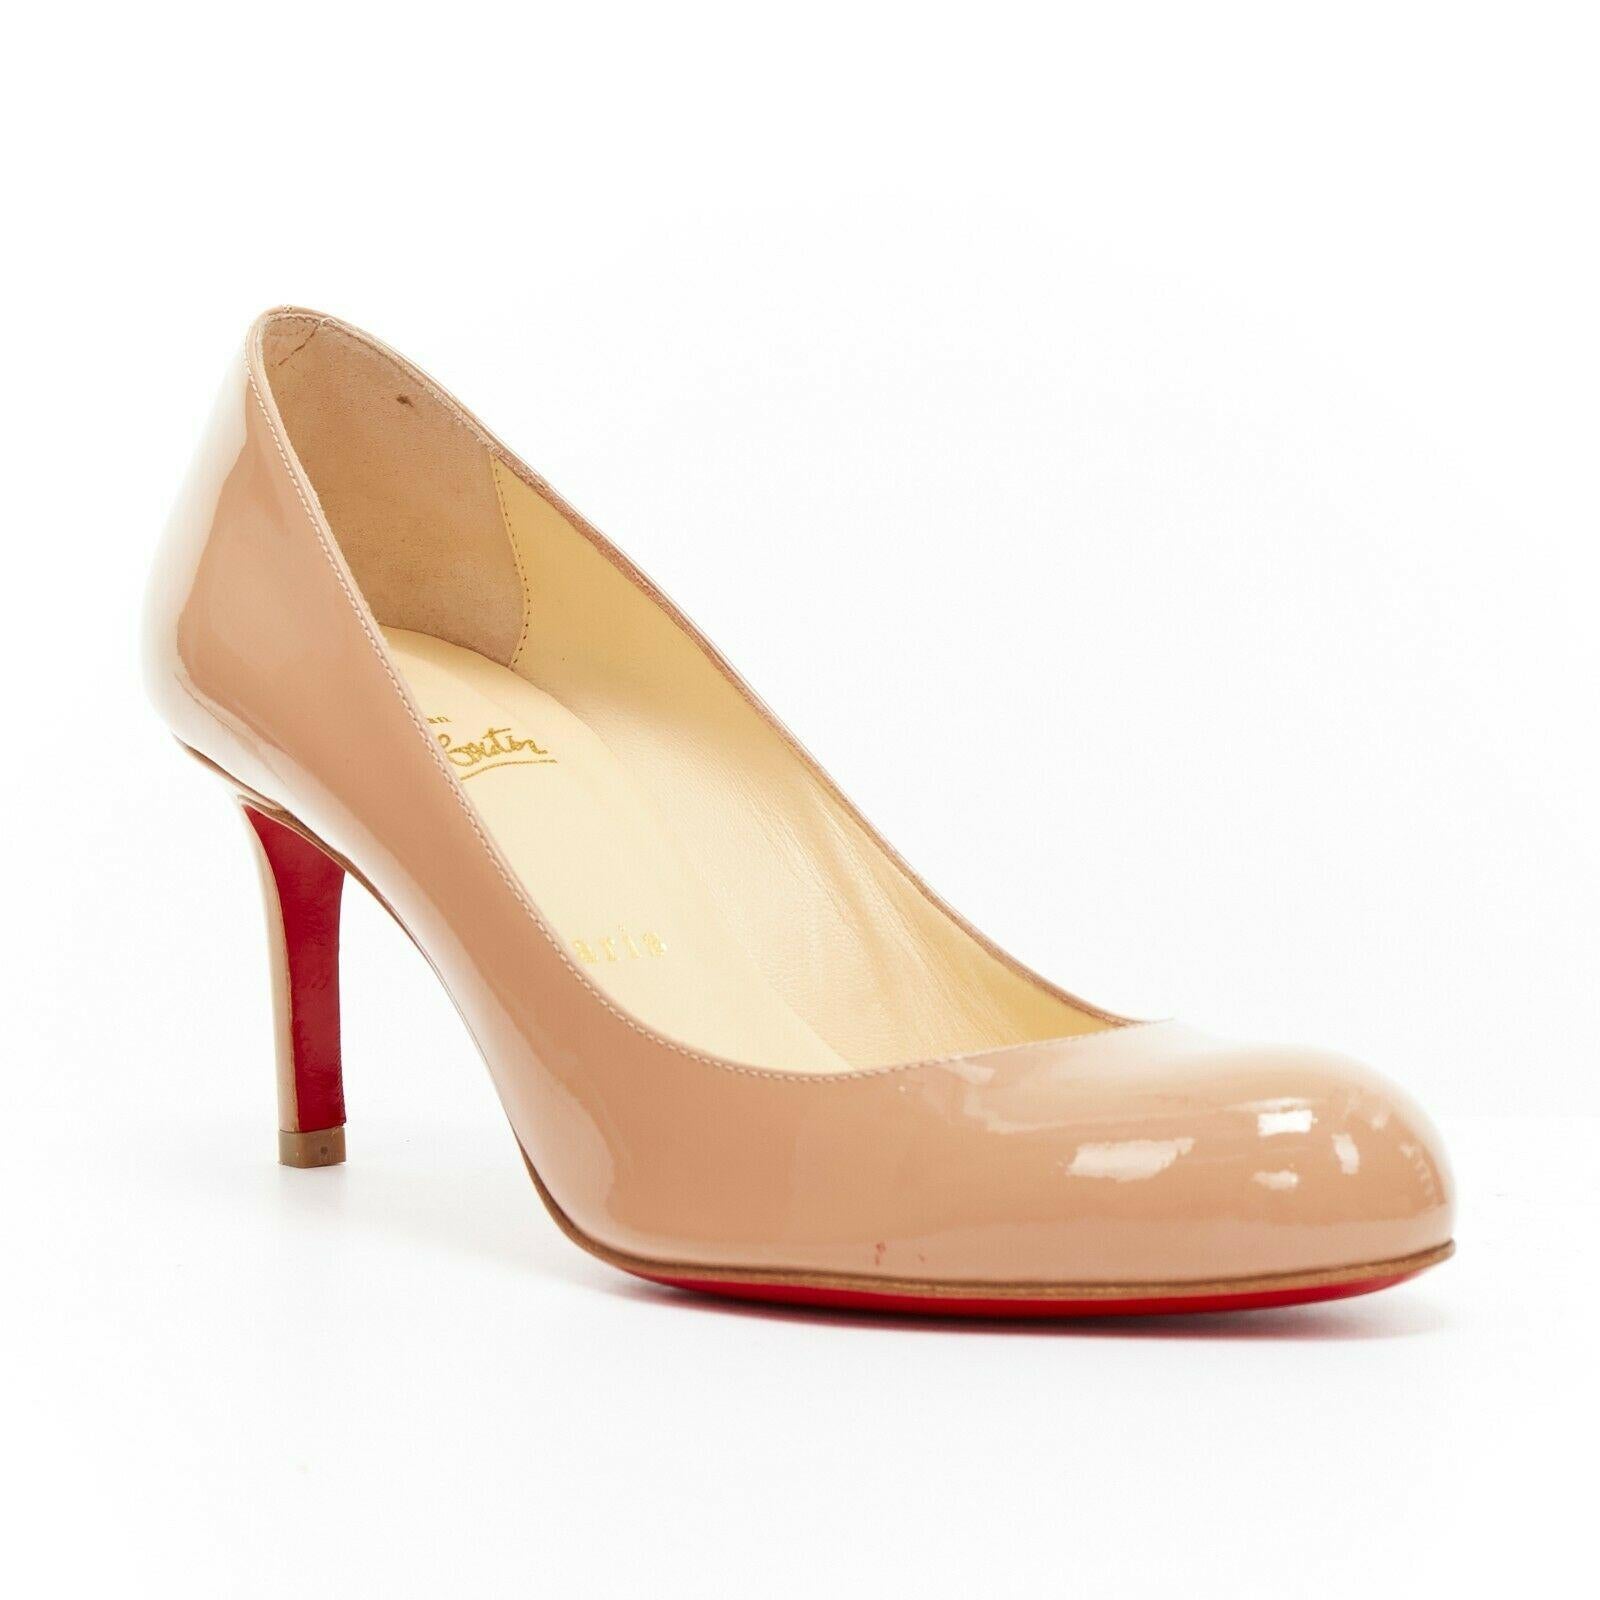 new CHRISTIAN LOUBOUTIN Simple Pump 70 nude patent round toe mid heel EU38
CHRISTIAN LOUBOUTIN
Simple Pump 70. 
Nude patent calf leather. 
Round toe. 
Tonal stitching. 
Slim mid heel. 
Padded tan leather lining. 
Signature Christian Louboutin red